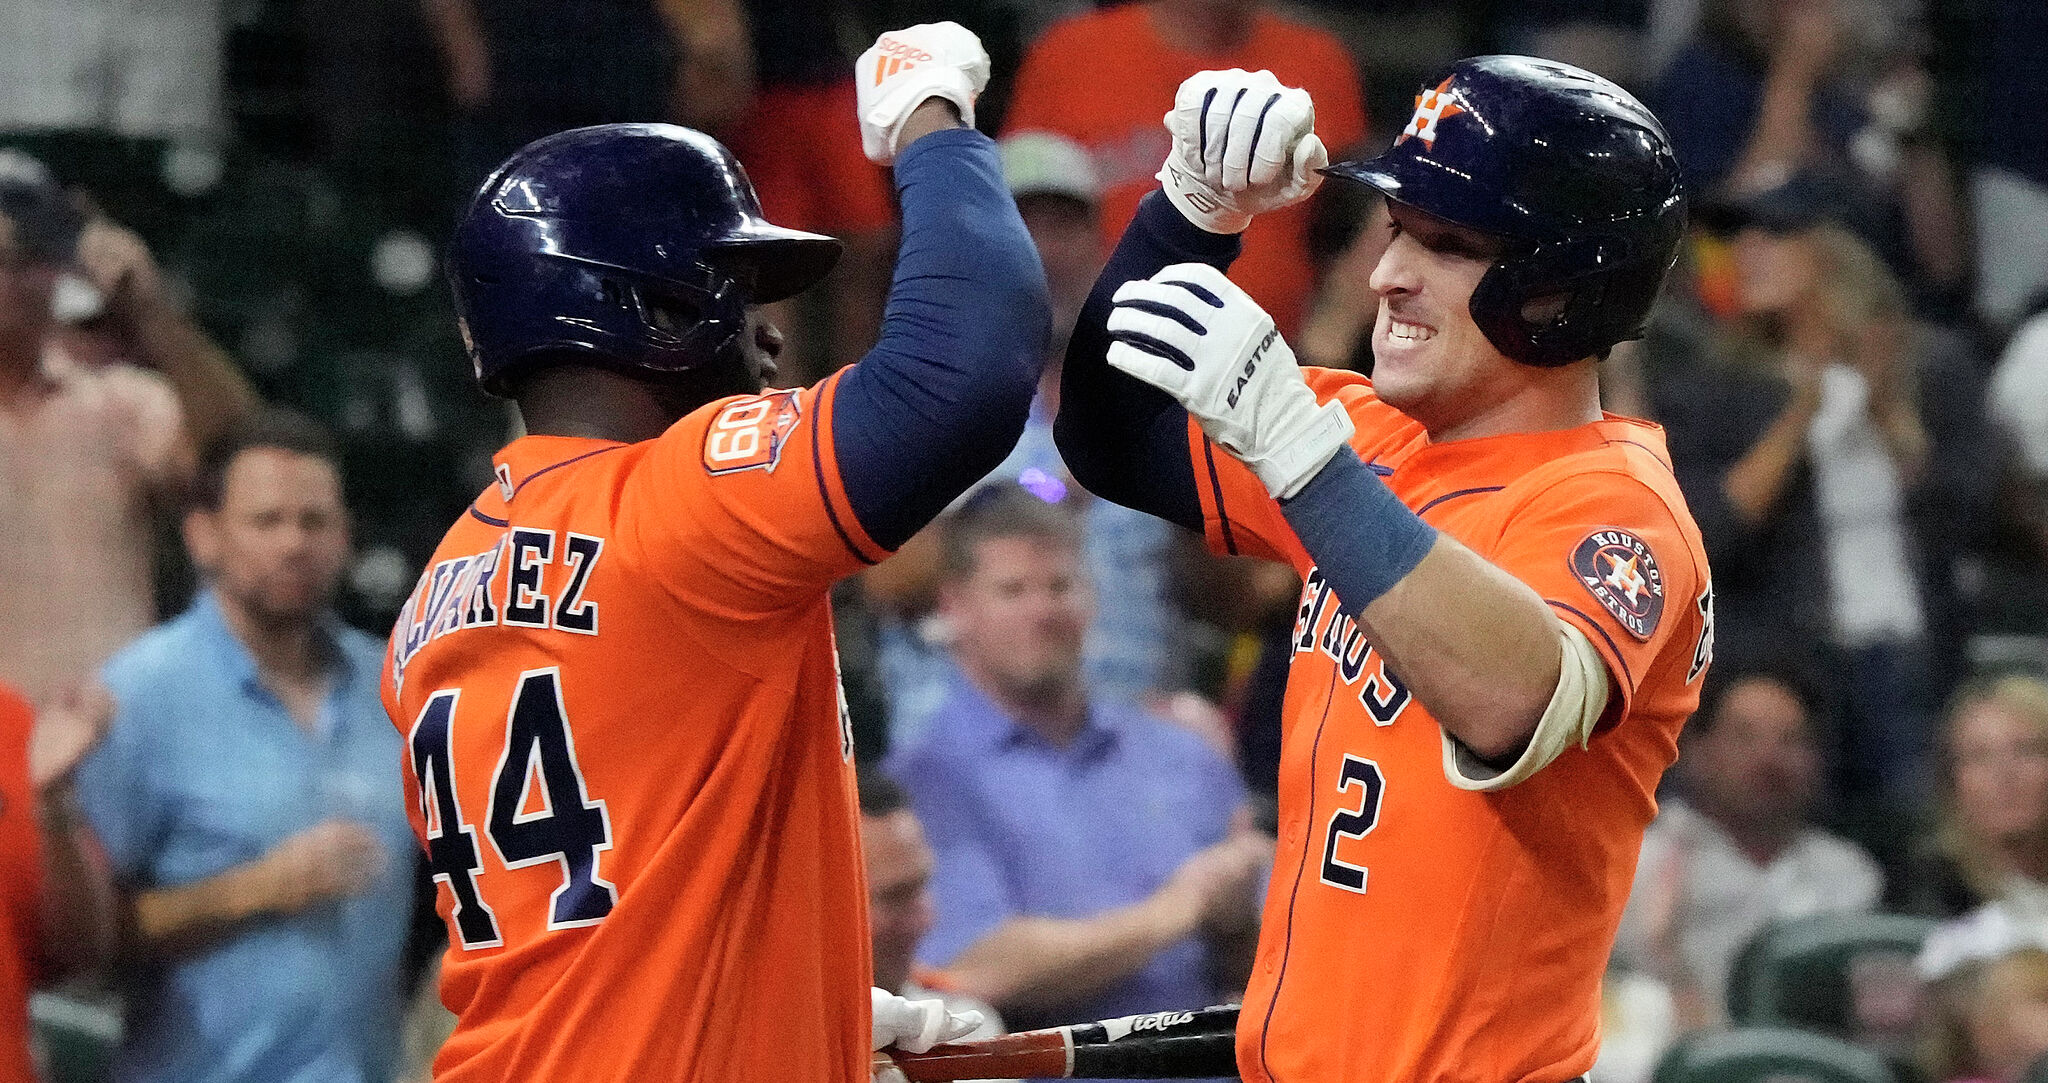 Are the Astros legit 2022 World Series contenders or phony pretenders?